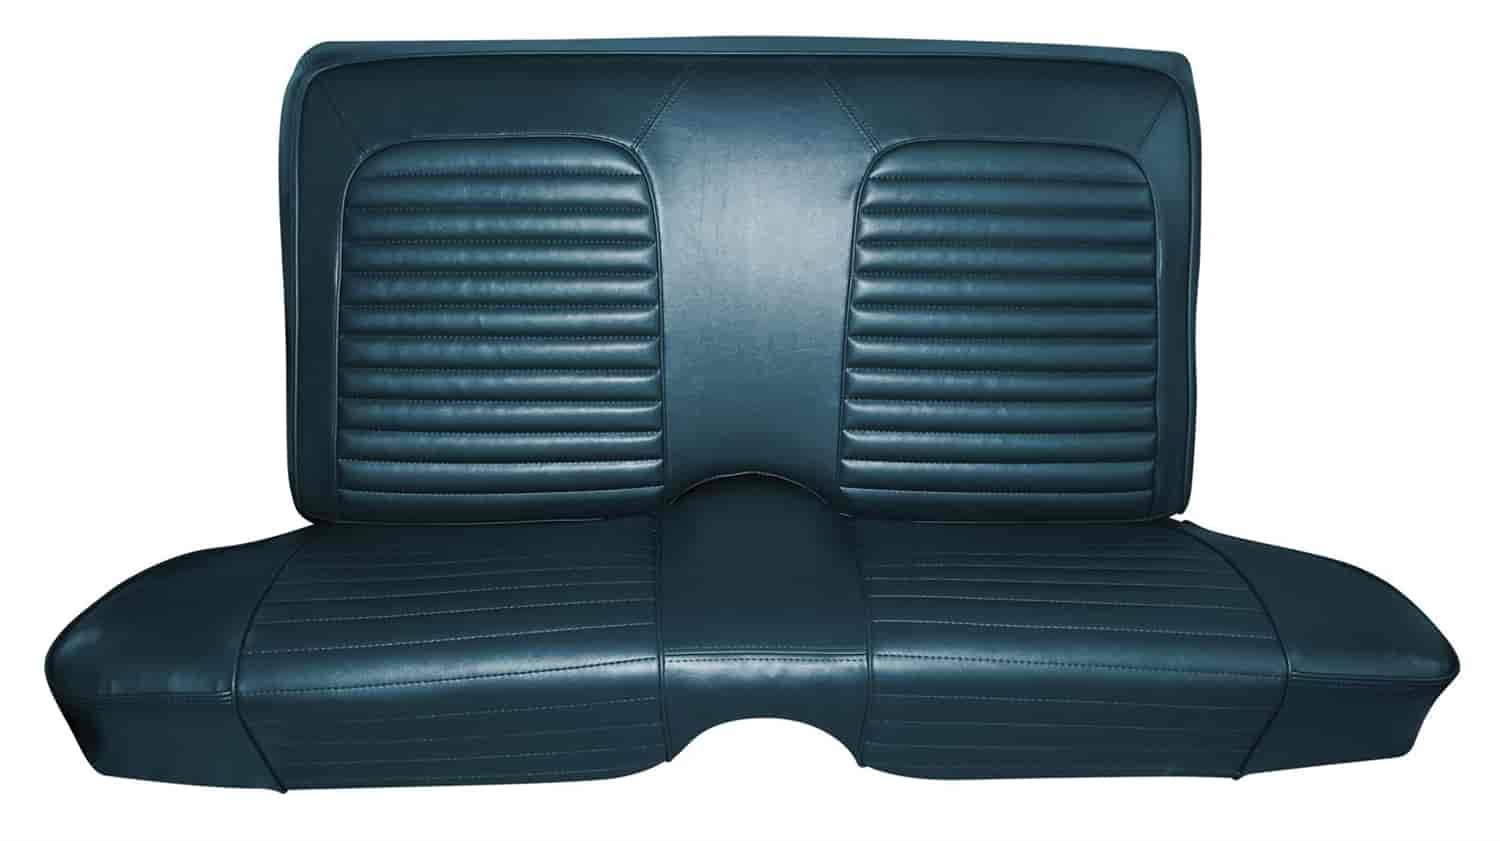 1964 Ford Falcon Futura 4-Door Station Wagon Interior Rear Bench Seat Upholstery for Vehicles with a Front Bench Seat